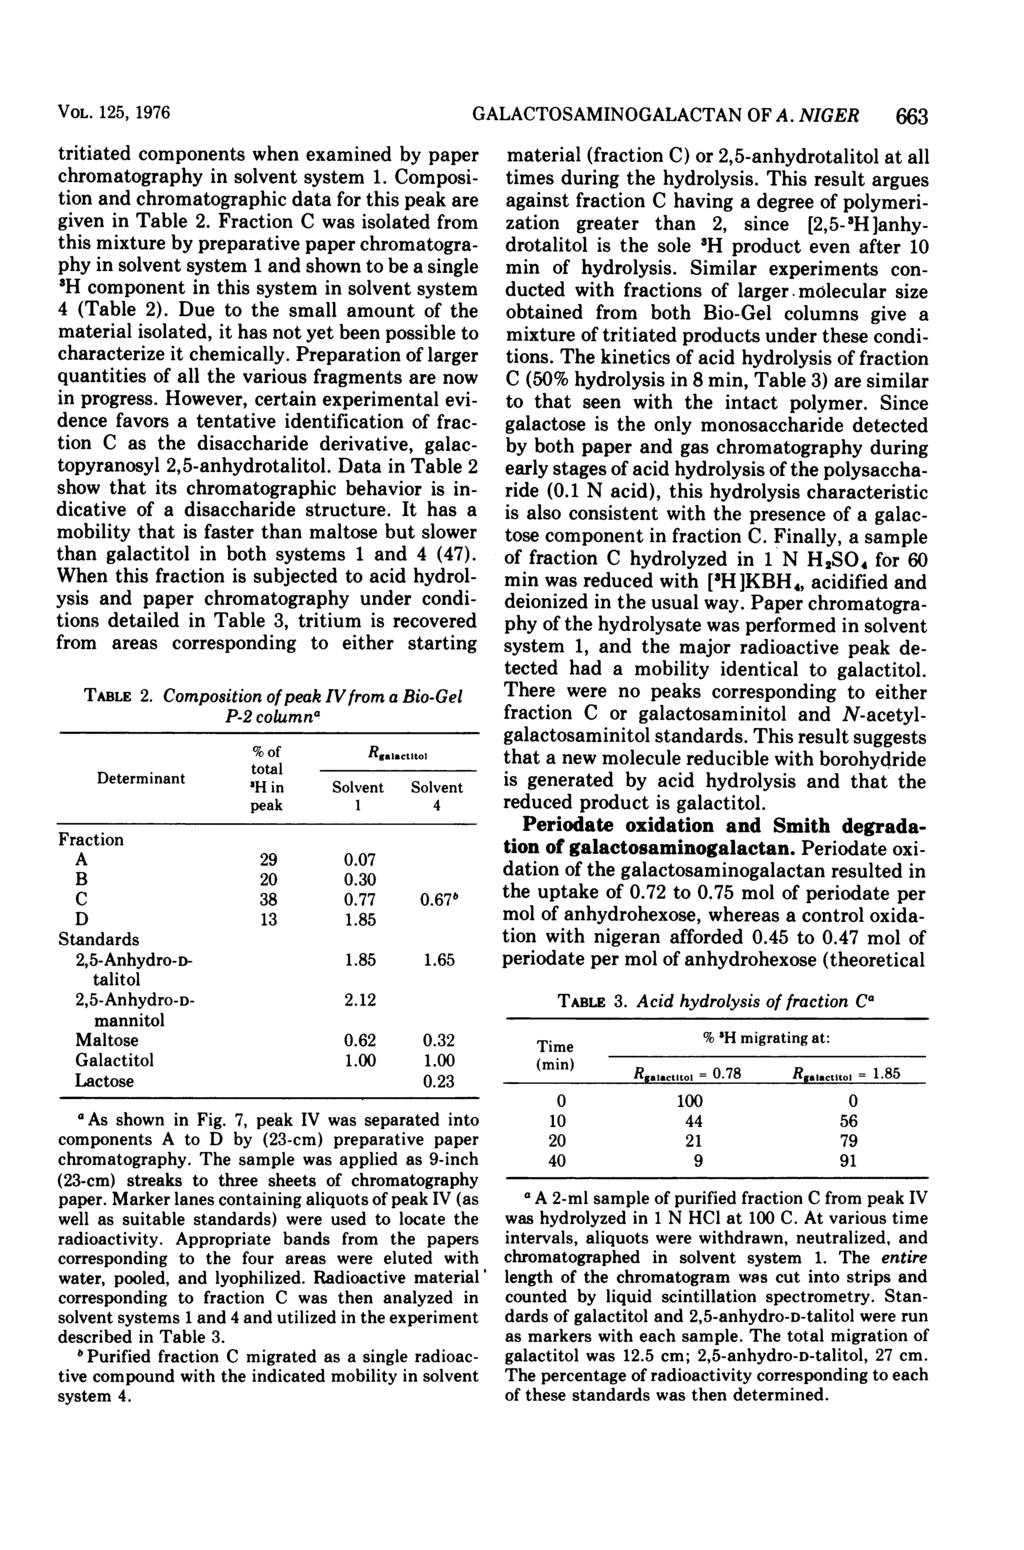 VOL. 125, 1976 tritiated components when examined by paper chromatography in solvent system 1. Composition and chromatographic data for this peak are given in Table 2.